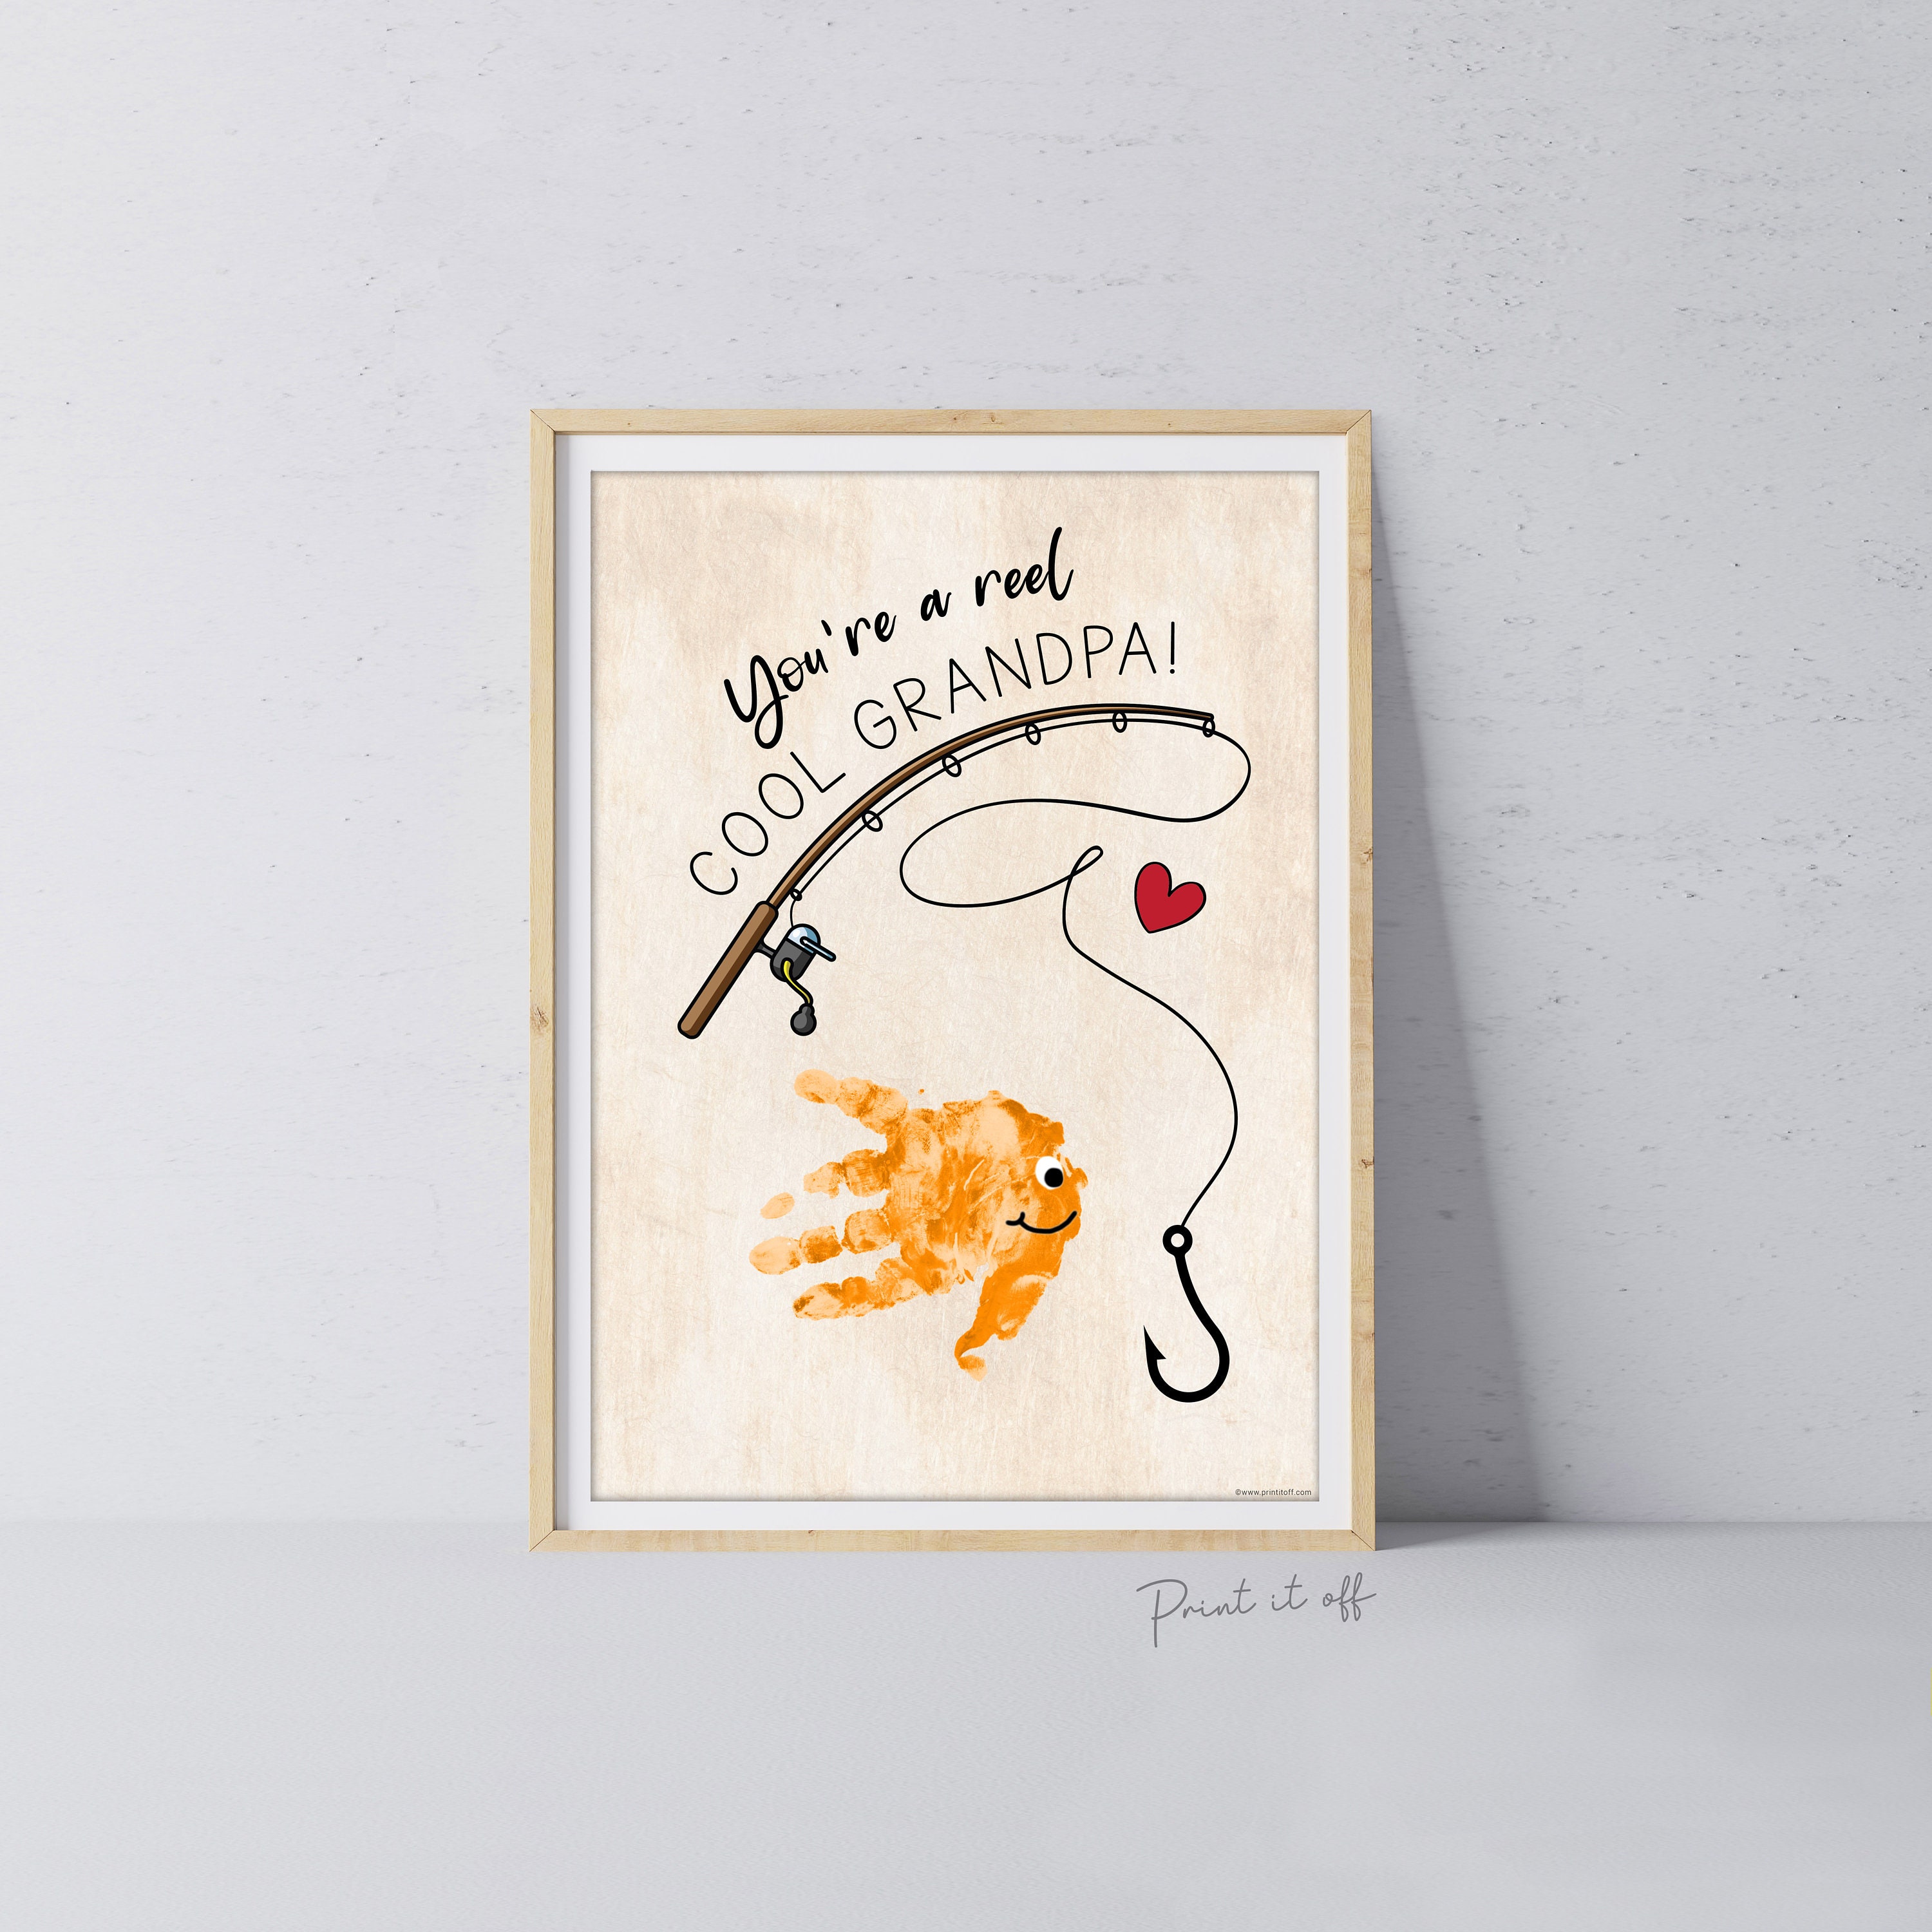 You're a Reel Cool Grandpa / Fish Hand Handprint Art / Father's Day  Birthday / Grandchild Gift / Kids Baby Toddler / Craft DIY Card 0231 -   Israel